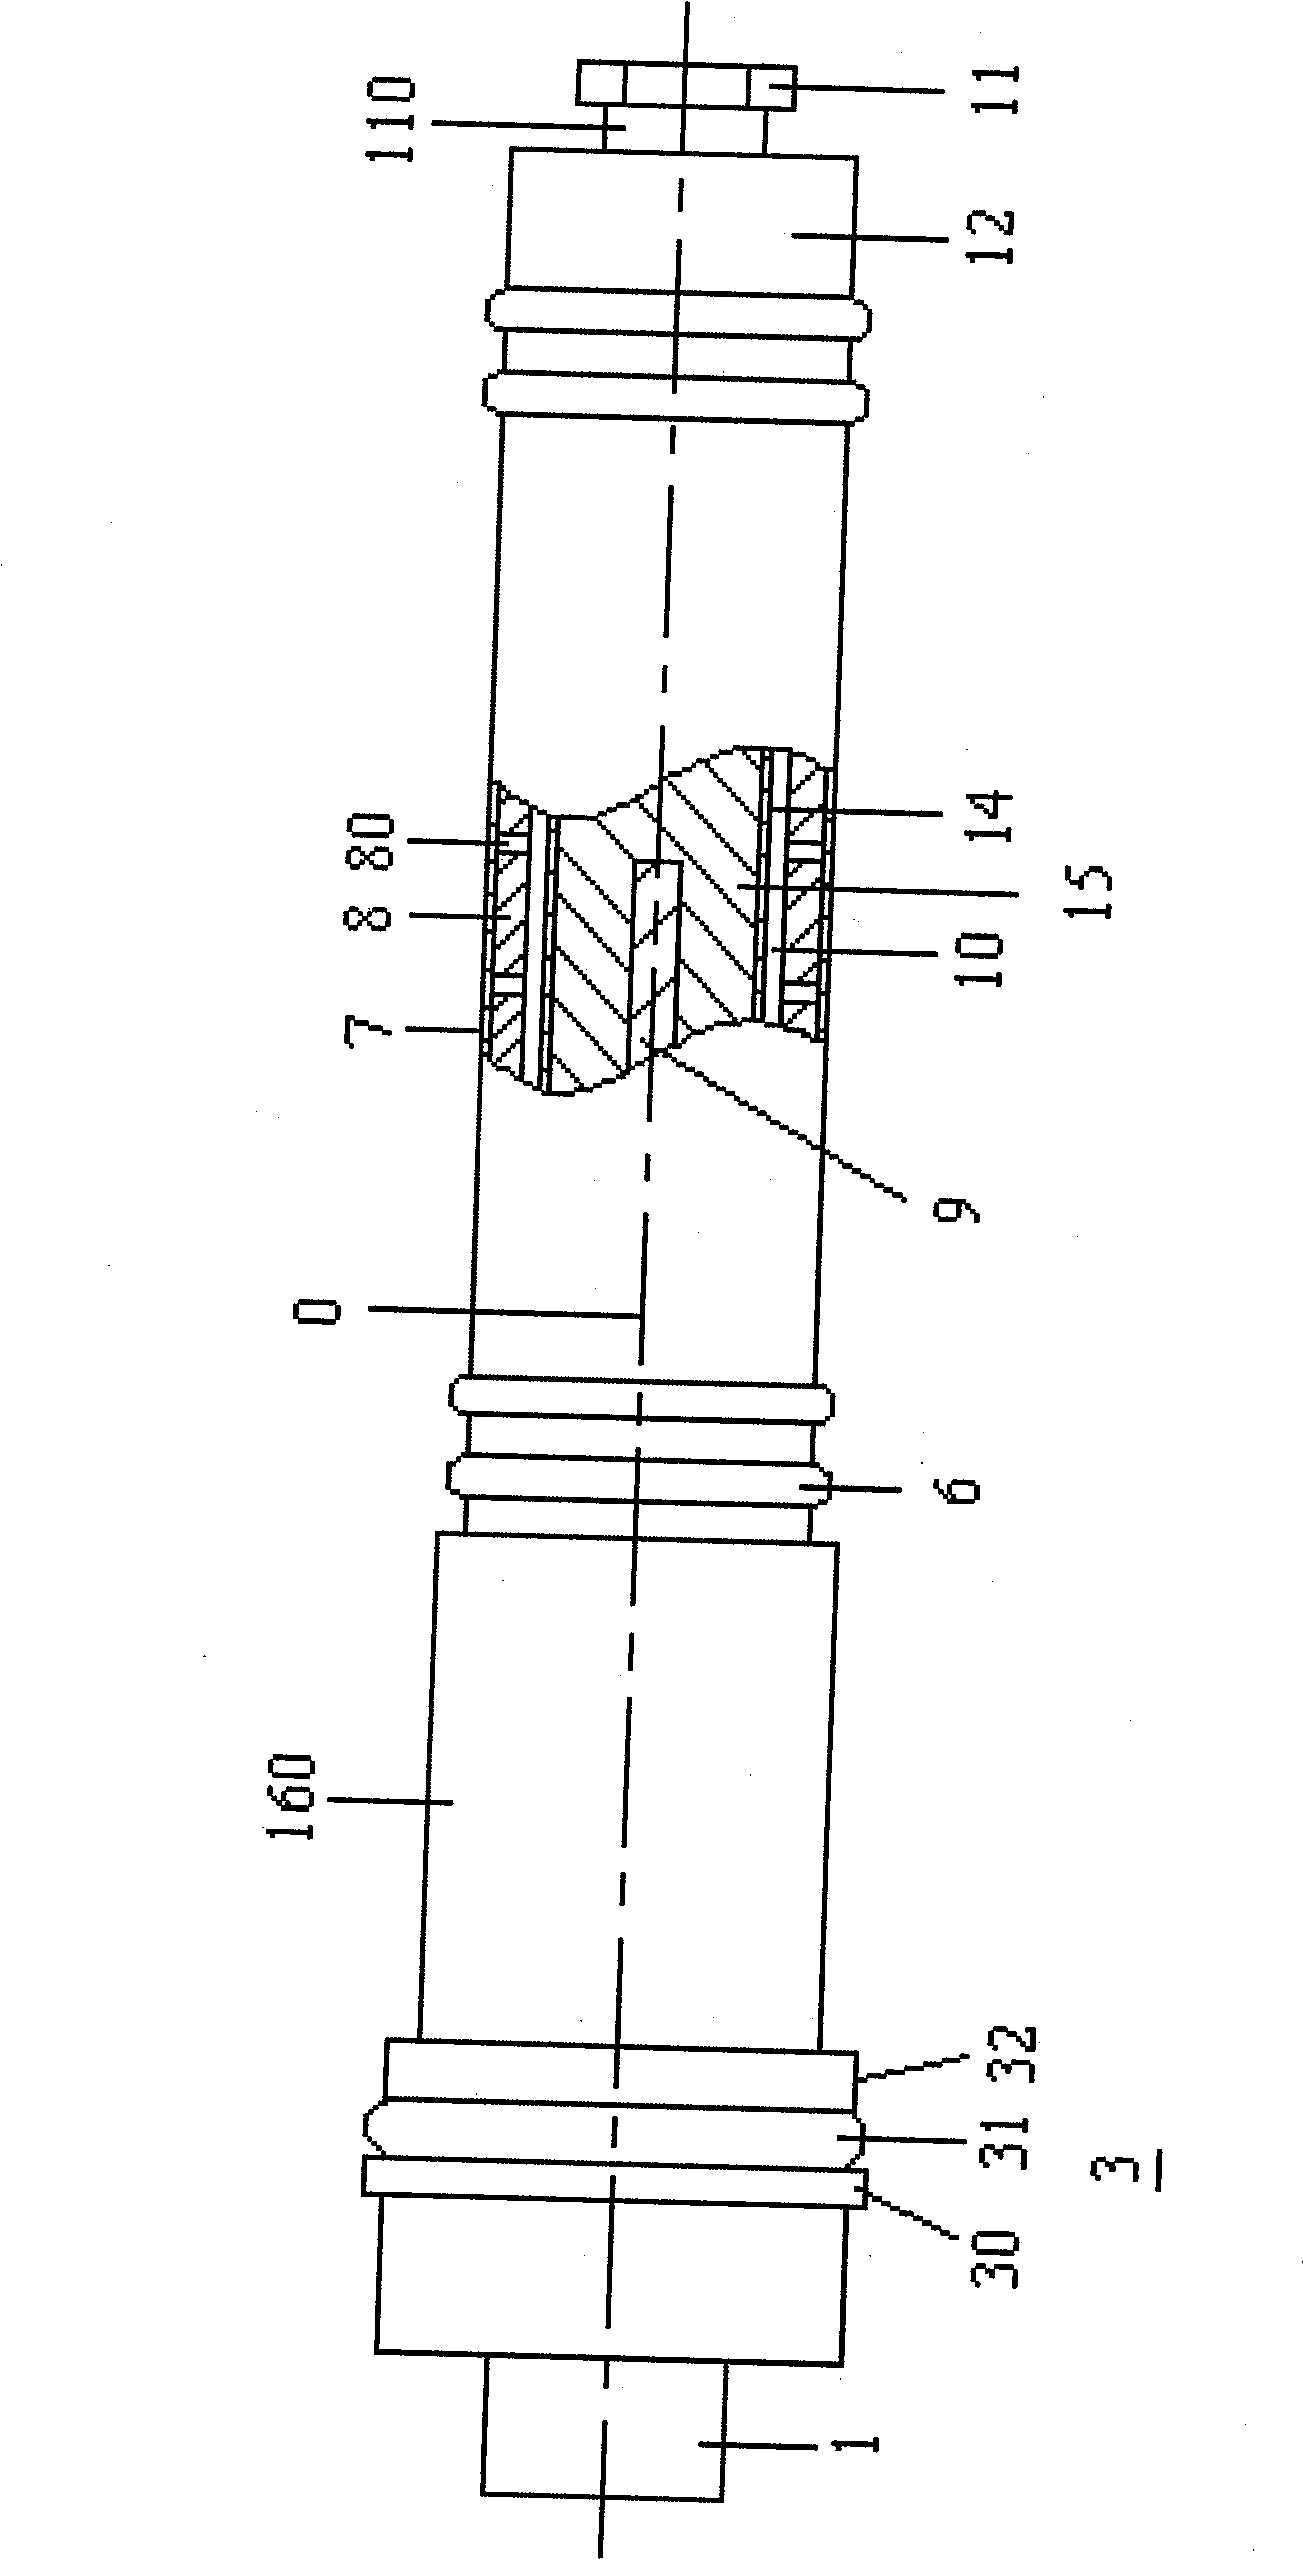 Electrode for measuring trace dissolved oxygen